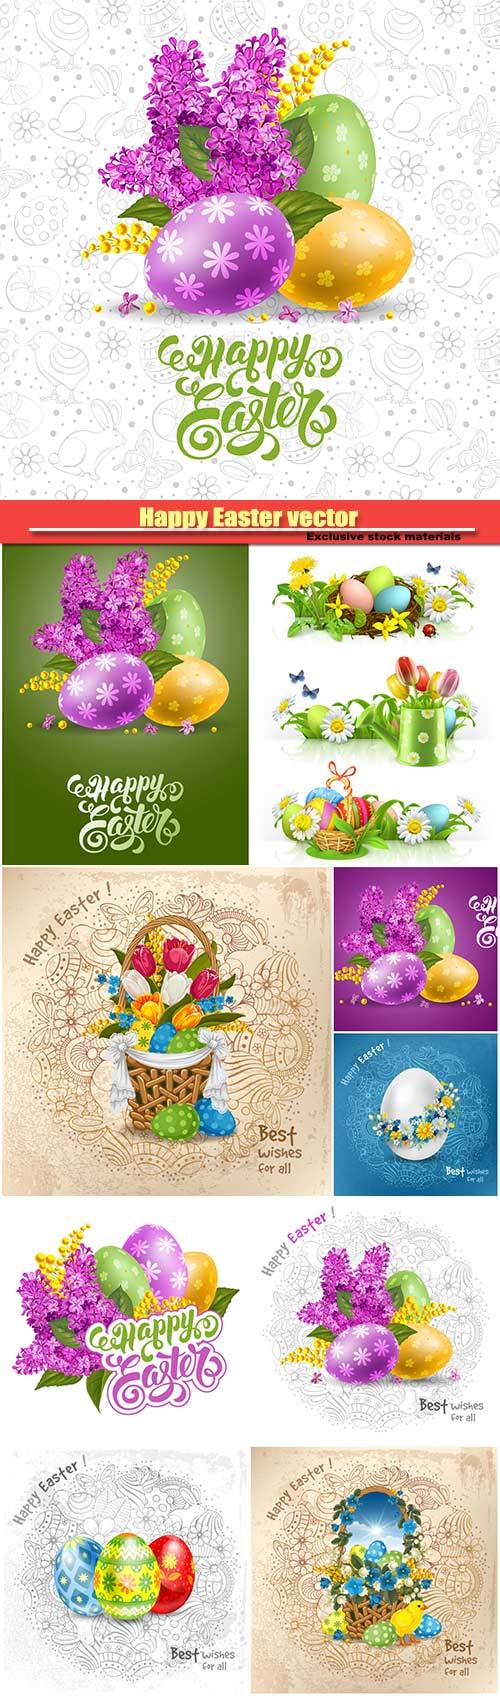 Happy Easter holiday vector backgrounds